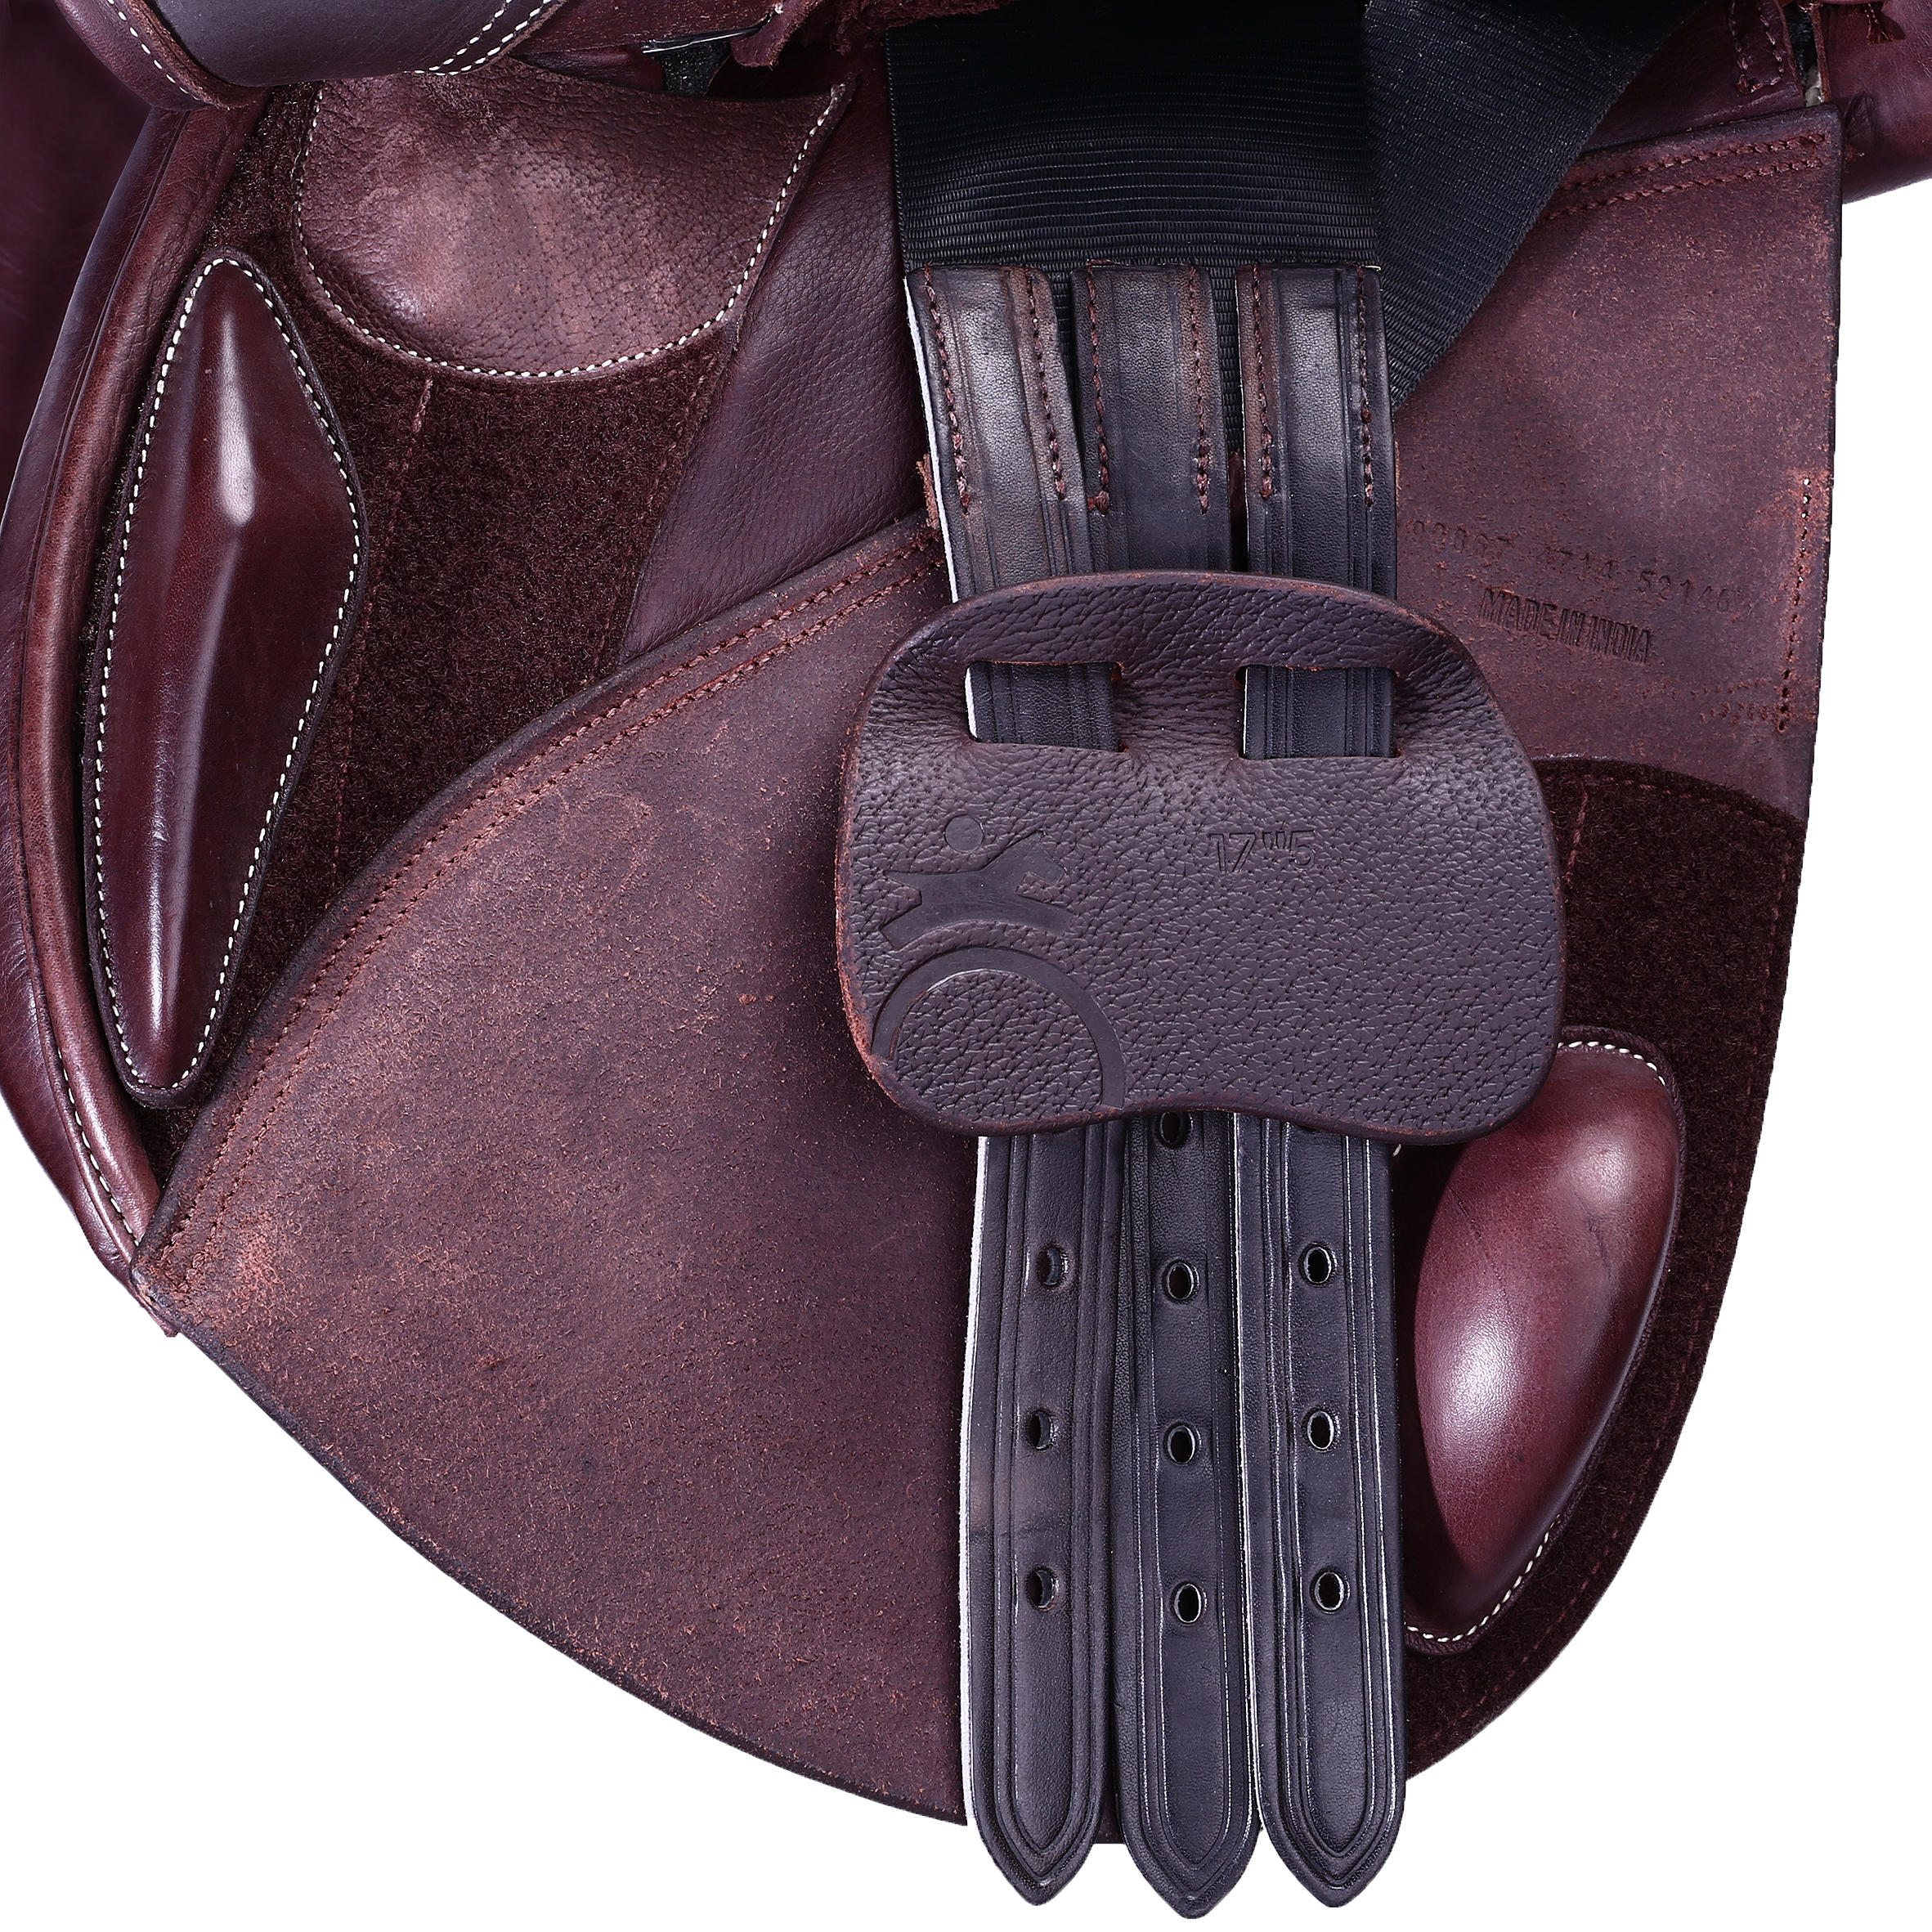 Horse Riding Versatile Leather Saddle for Horse Paddock 17.5" - Brown - FOUGANZA